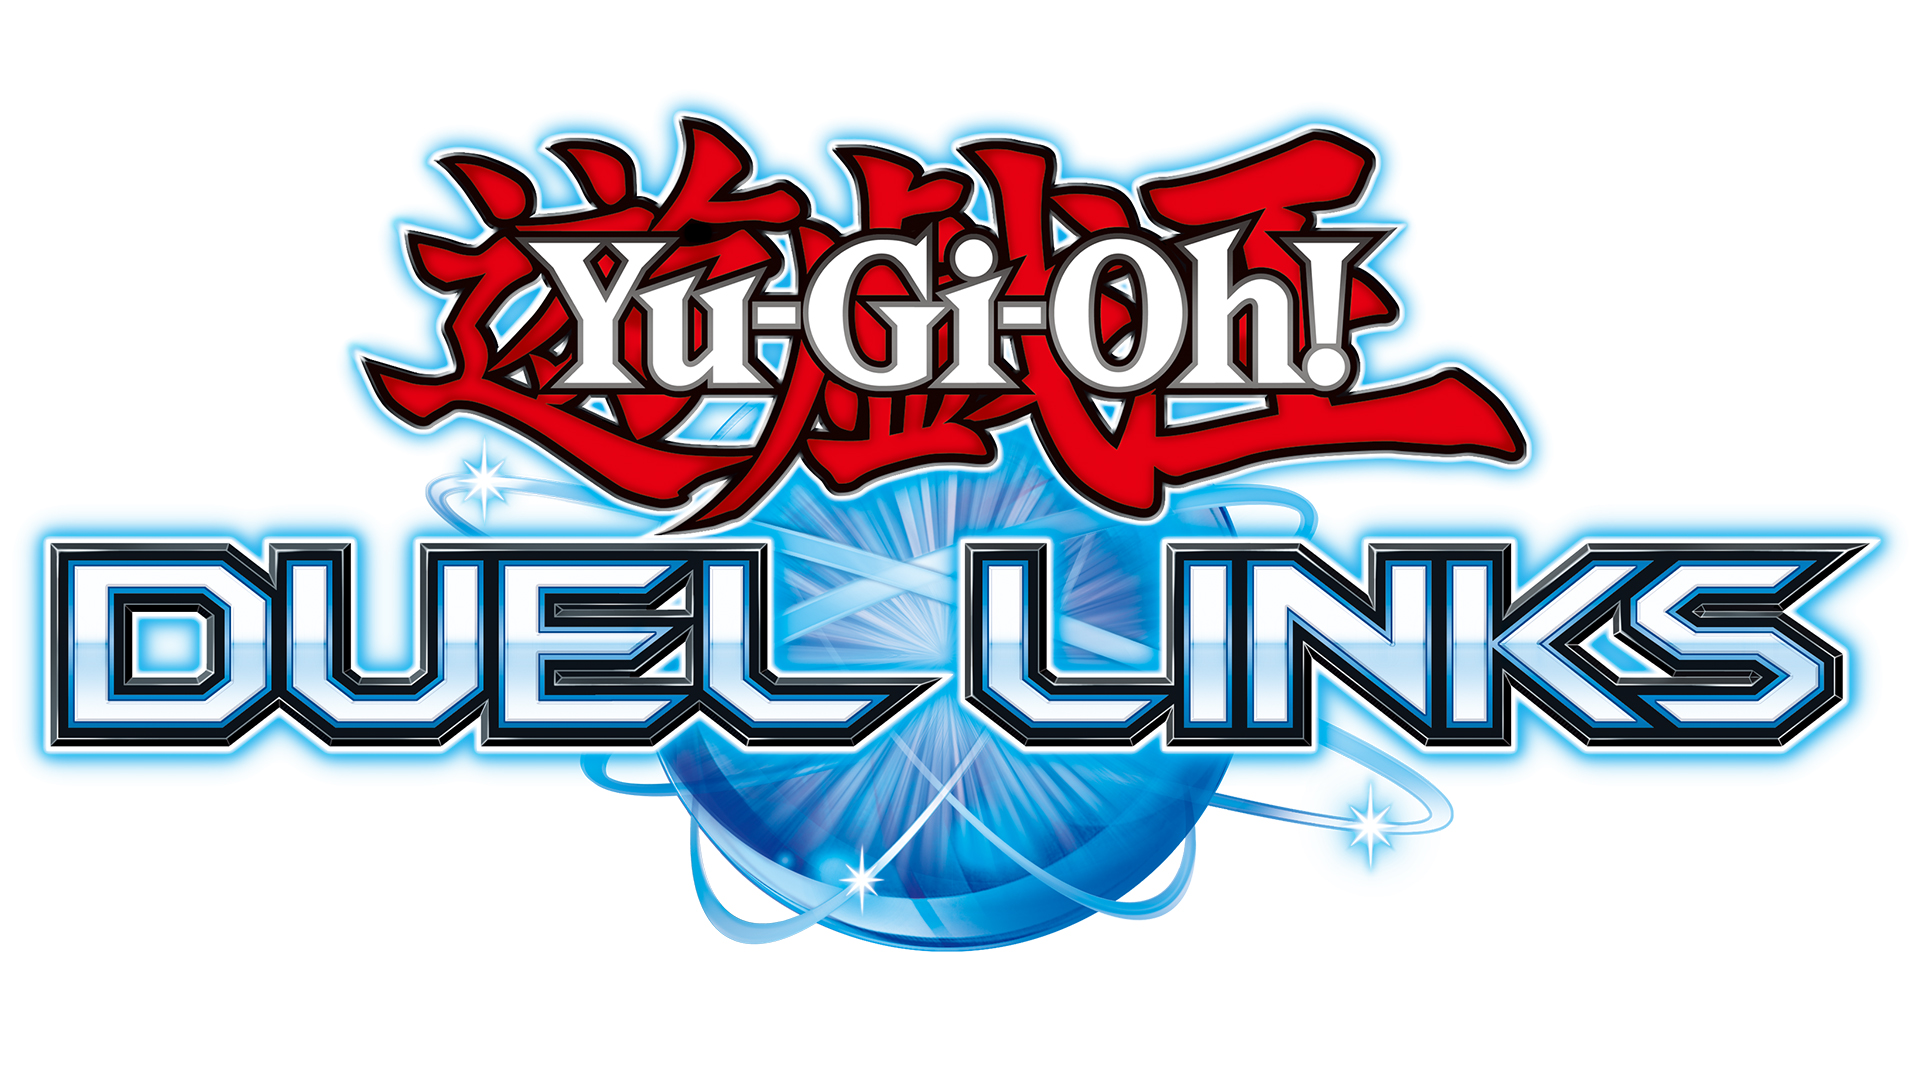 Yu Gi Oh! Duel Links Players Get Free God Card And More This Weekend